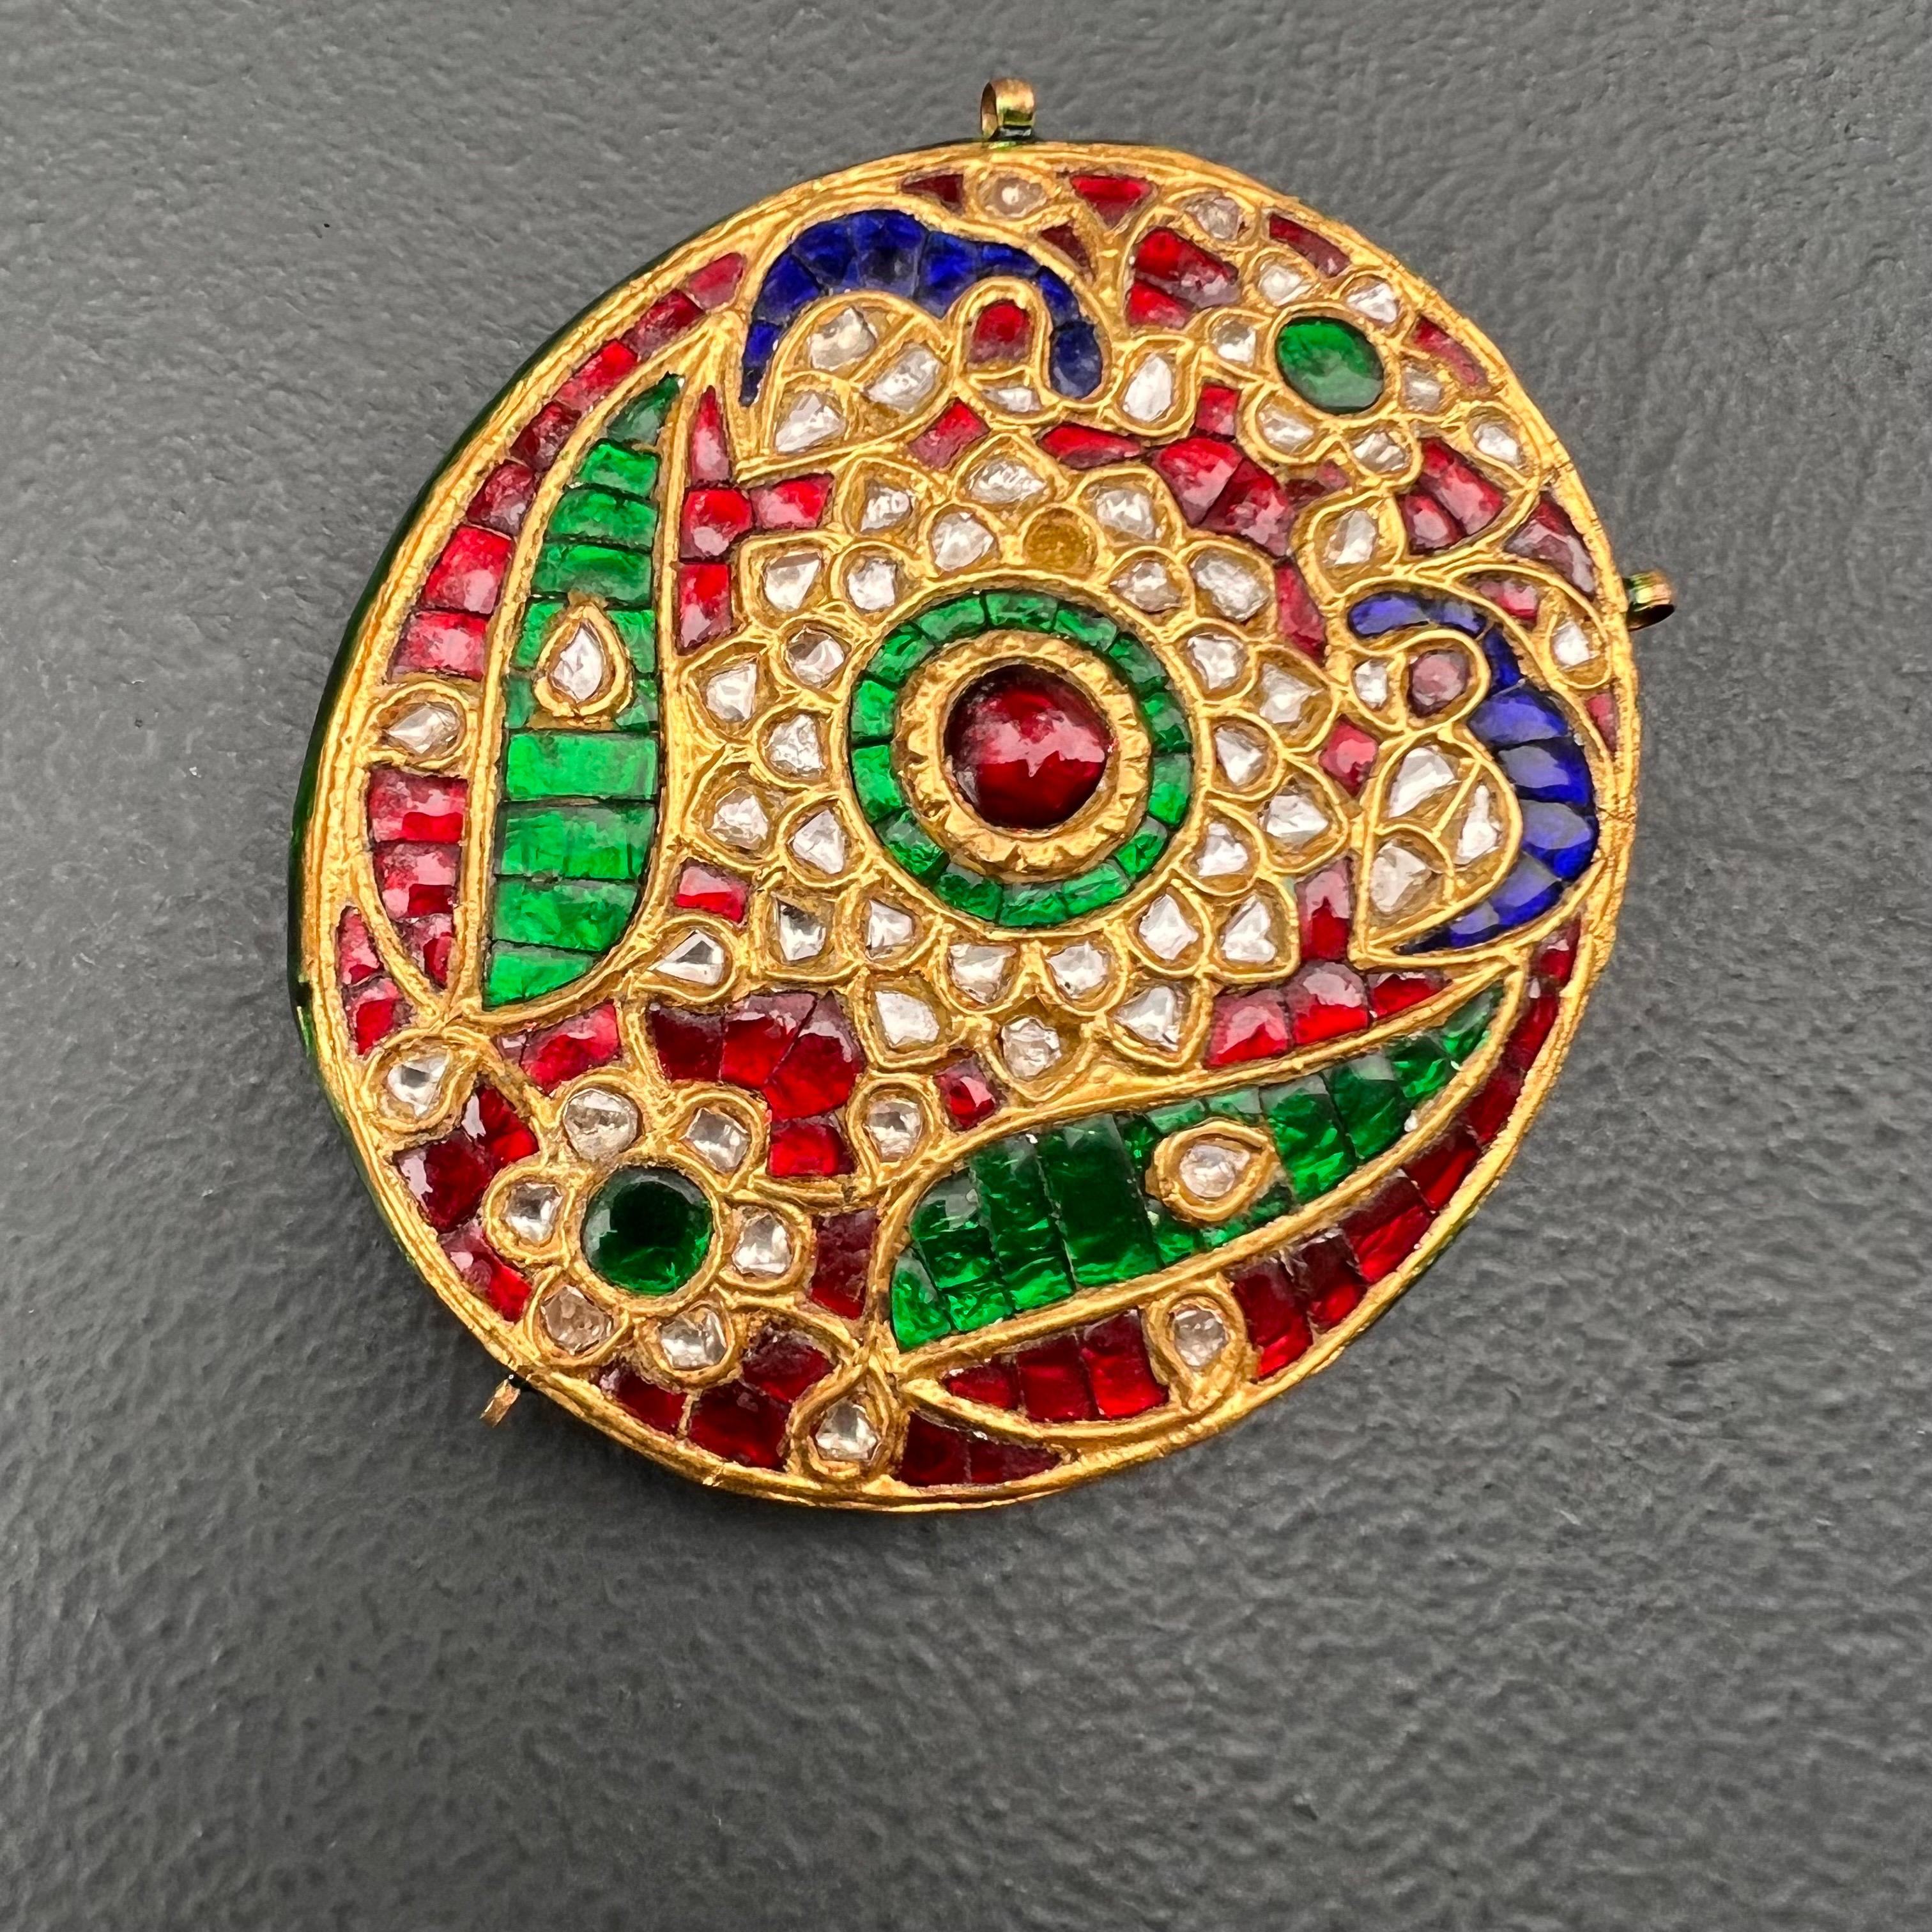 FABULOUS LARGE vintage Mughal / Mogul 22kt yellow gold pendant with genuine irregular size rose cut diamonds ,emeralds , sapphires and ruby insert . Stones make a peacock design with floral motifs on front side . Pendant back is also very